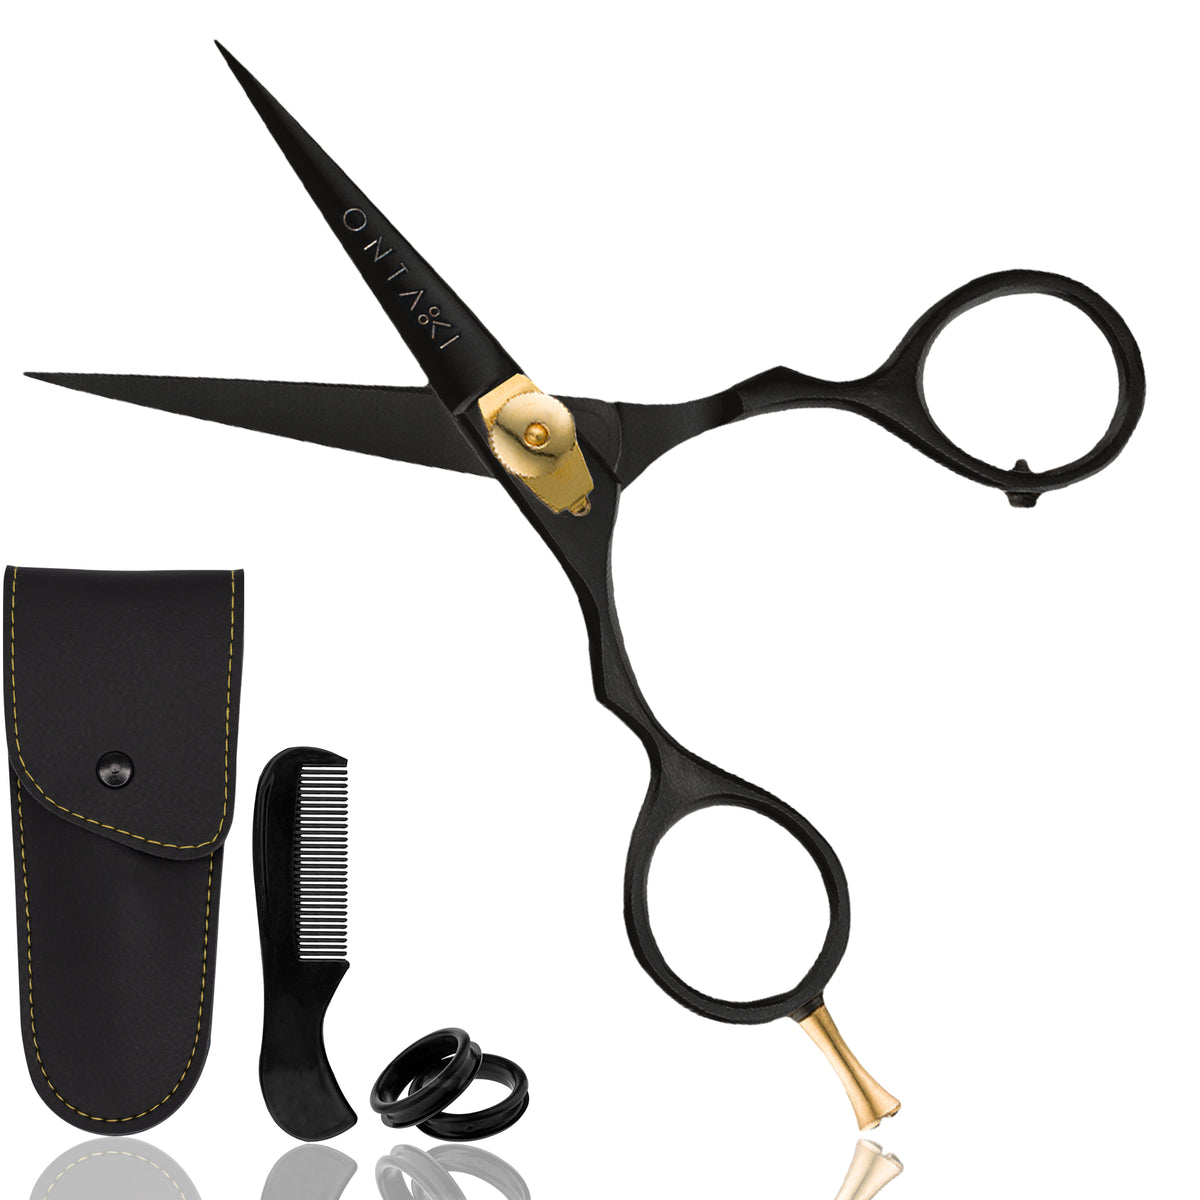 Sirabe HIGH-END Professional Hair Scissors, Ultra Sharp Blades for